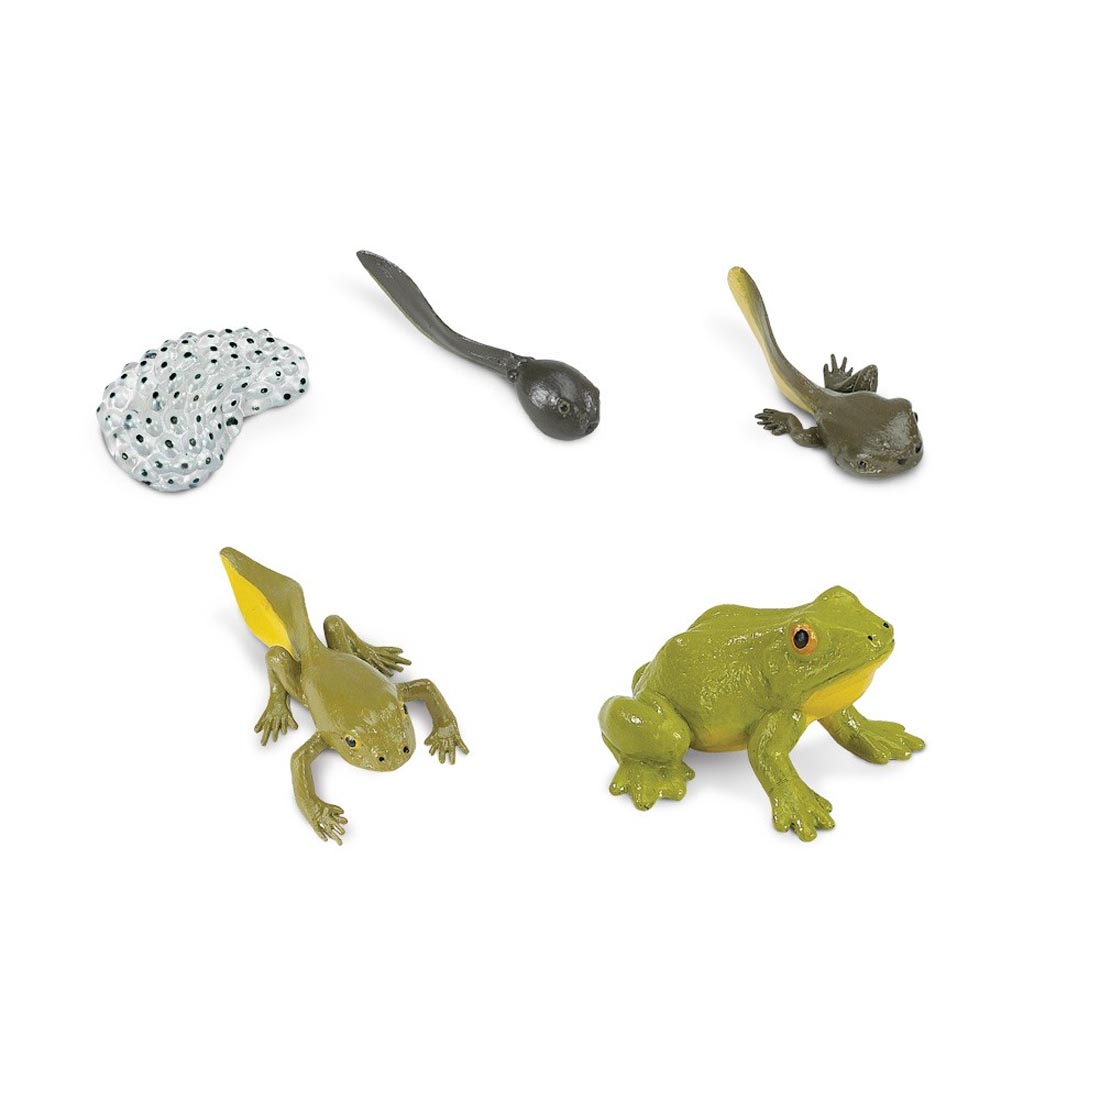 Figurines representing the Life Cycle of a Frog